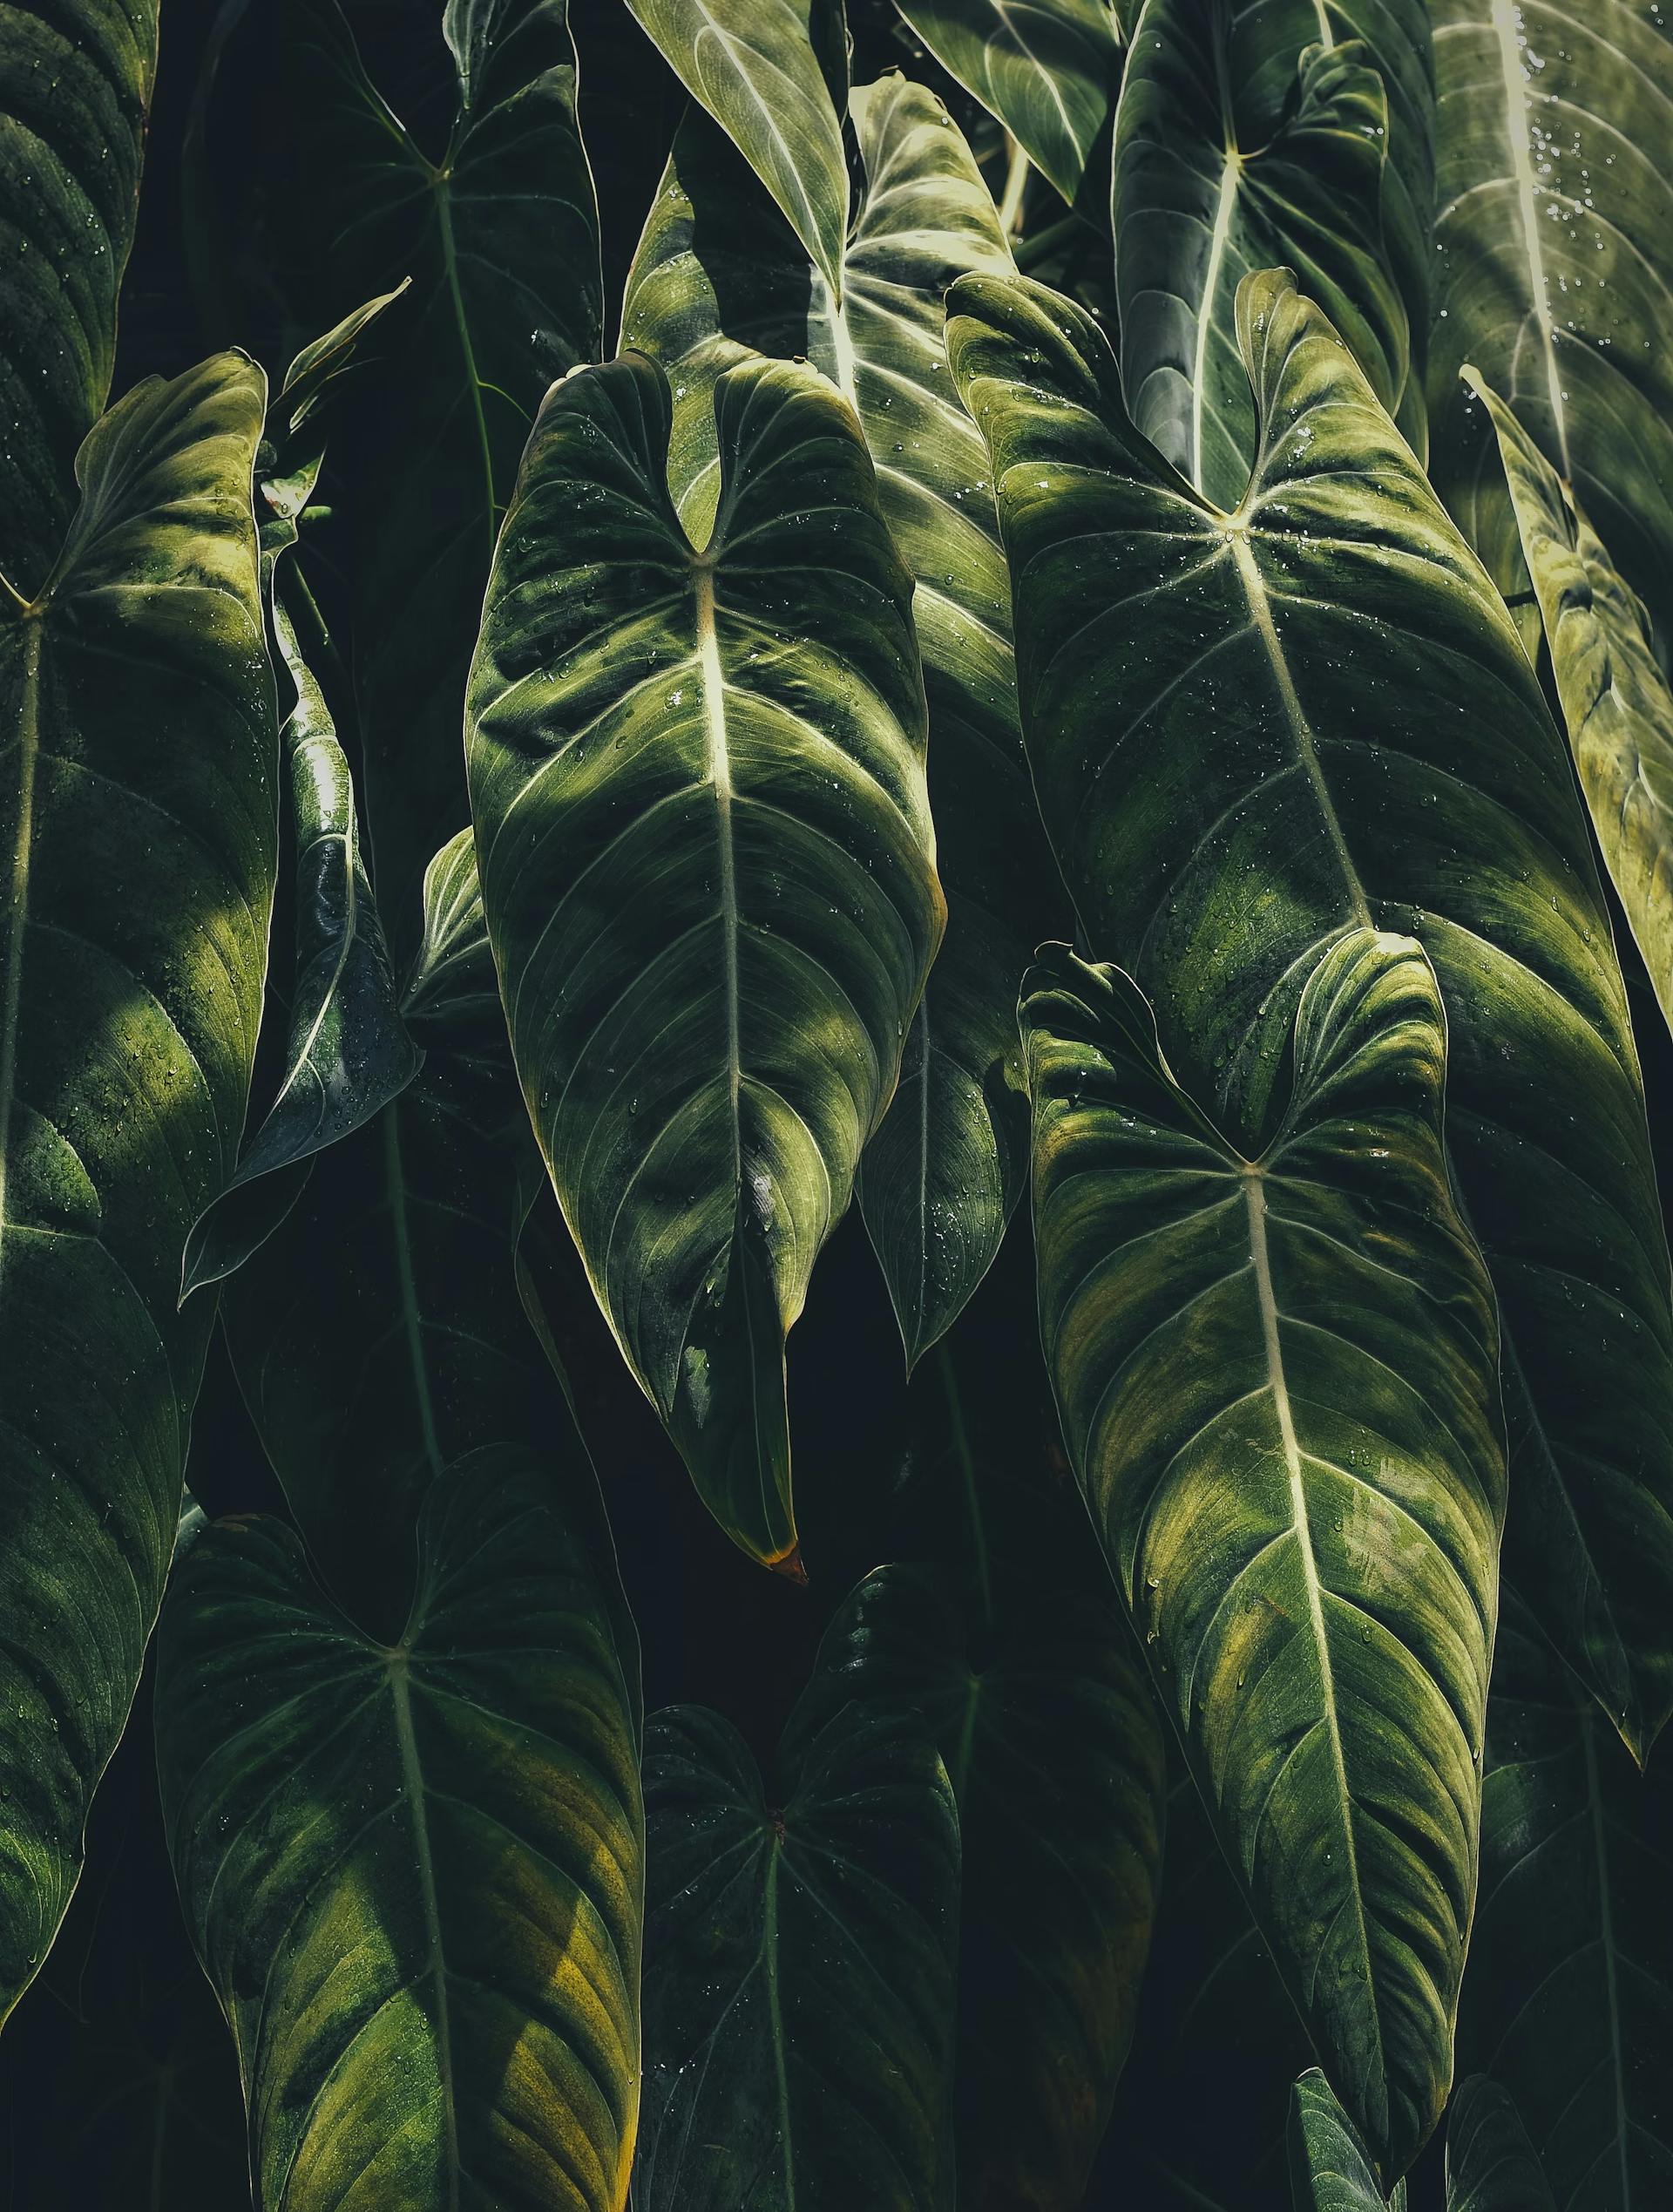 Image of multiple philodendrons in a forest